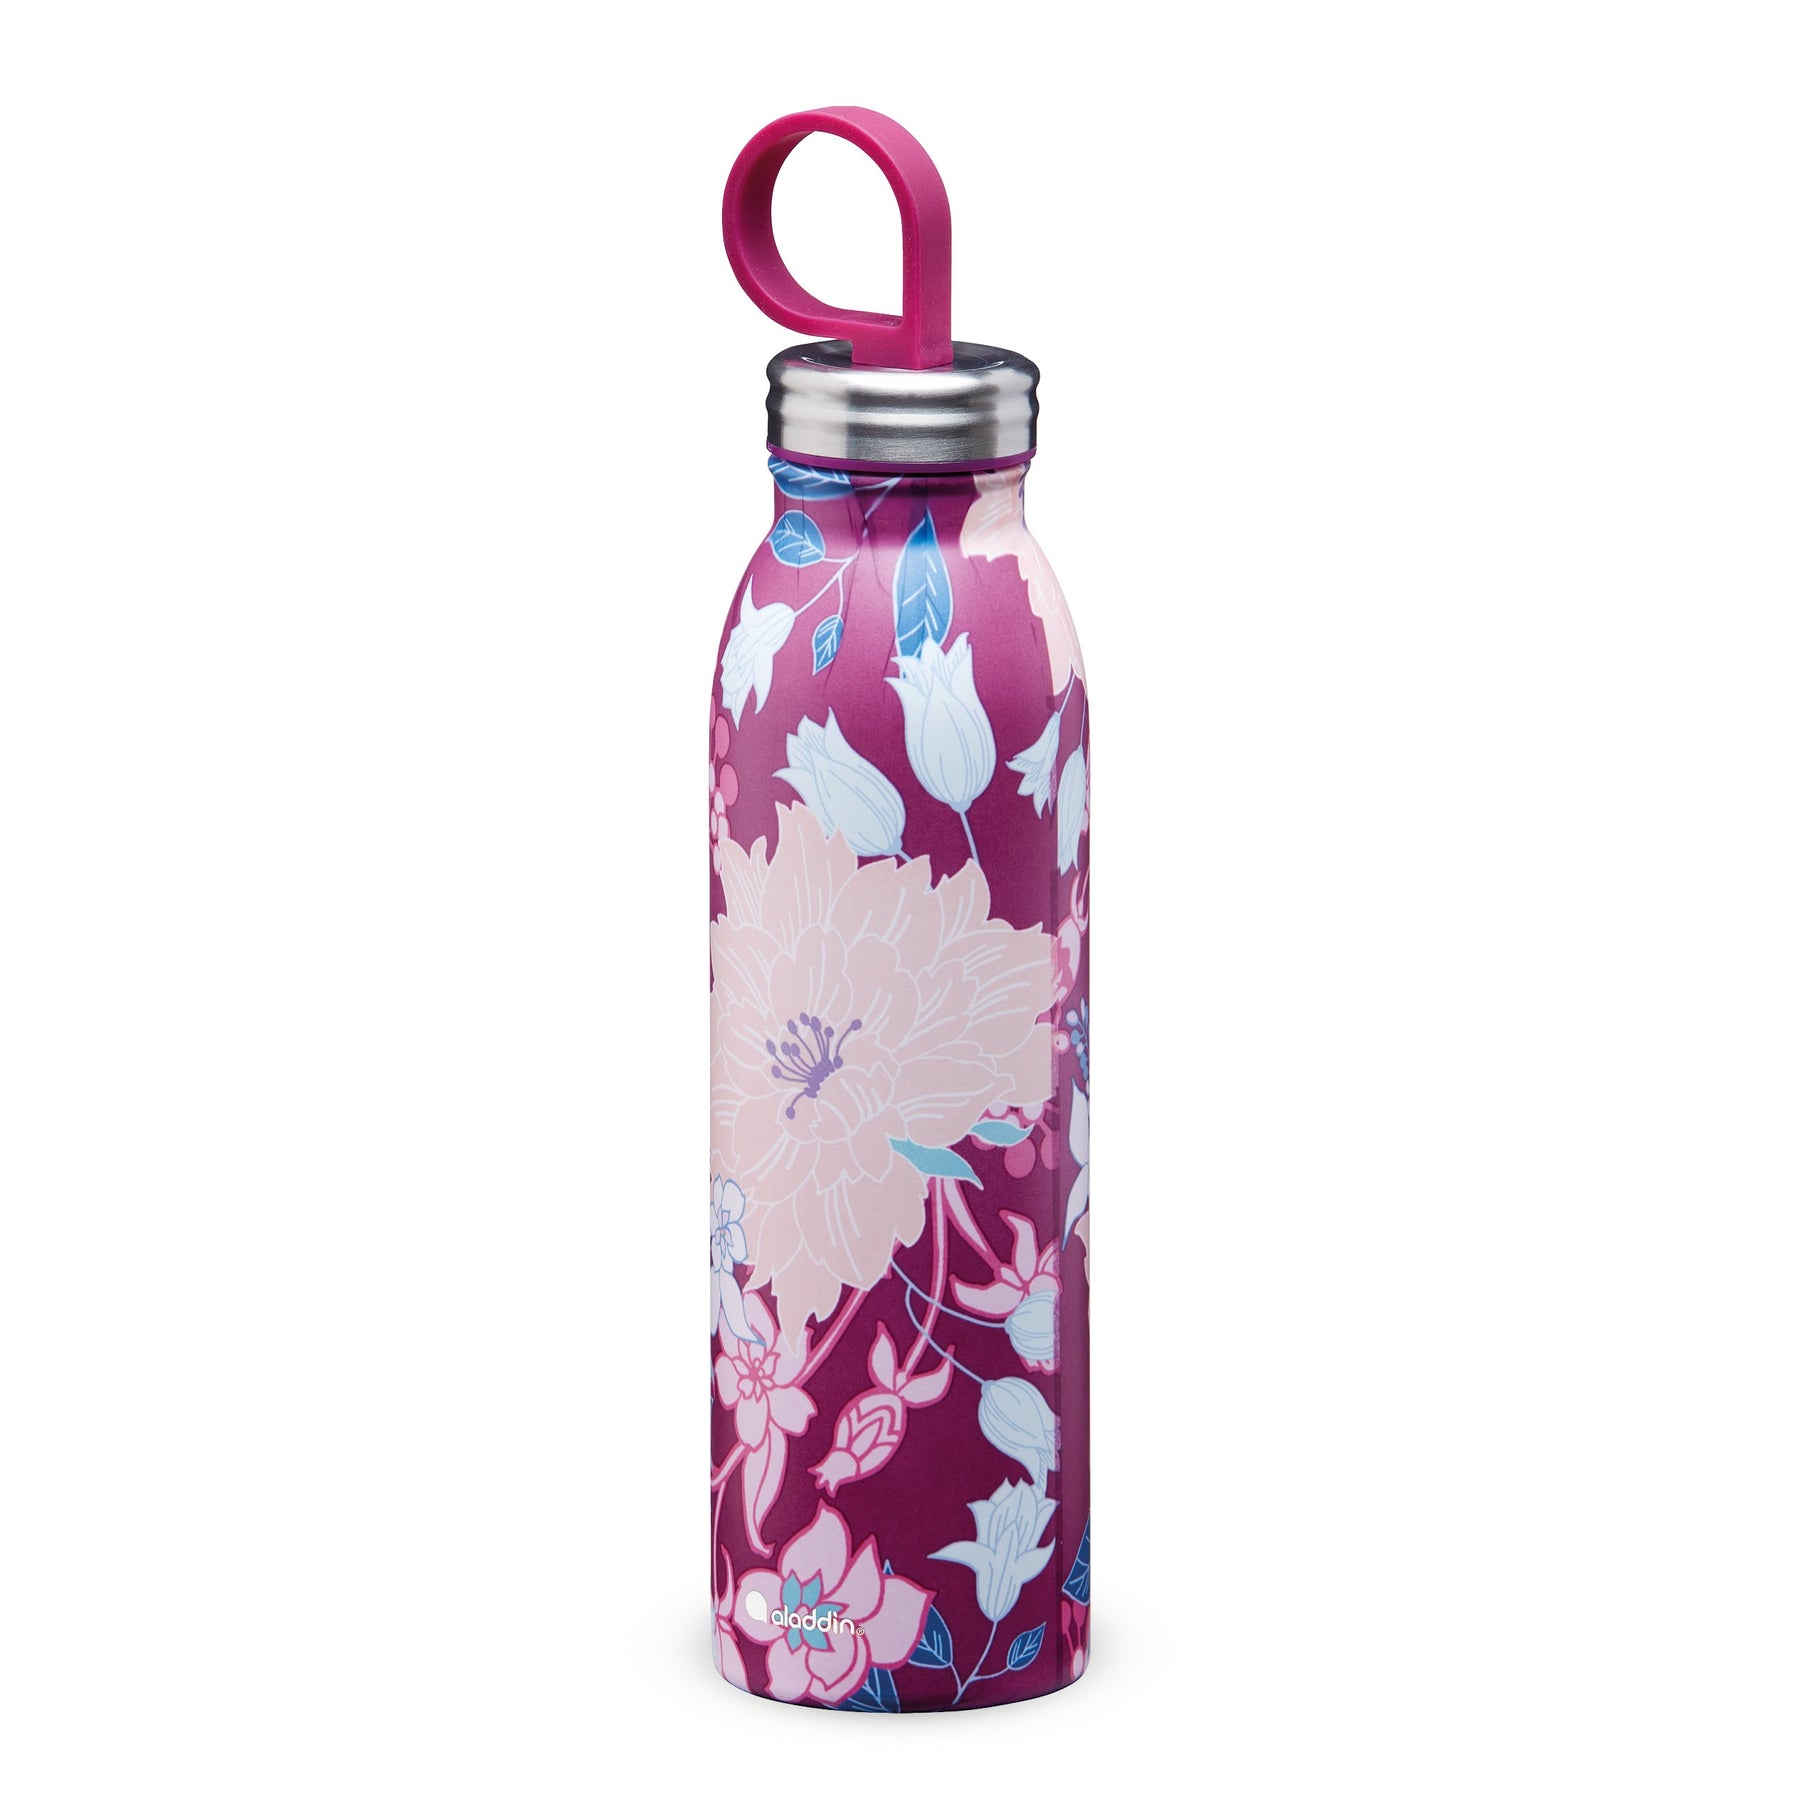 Aladdin-Chilled-Thermavac_-Style-Stainless-Steel-Water-Bottle-0.55L-Dahlia-Berry-10-09425-009-Hero_1800x1800